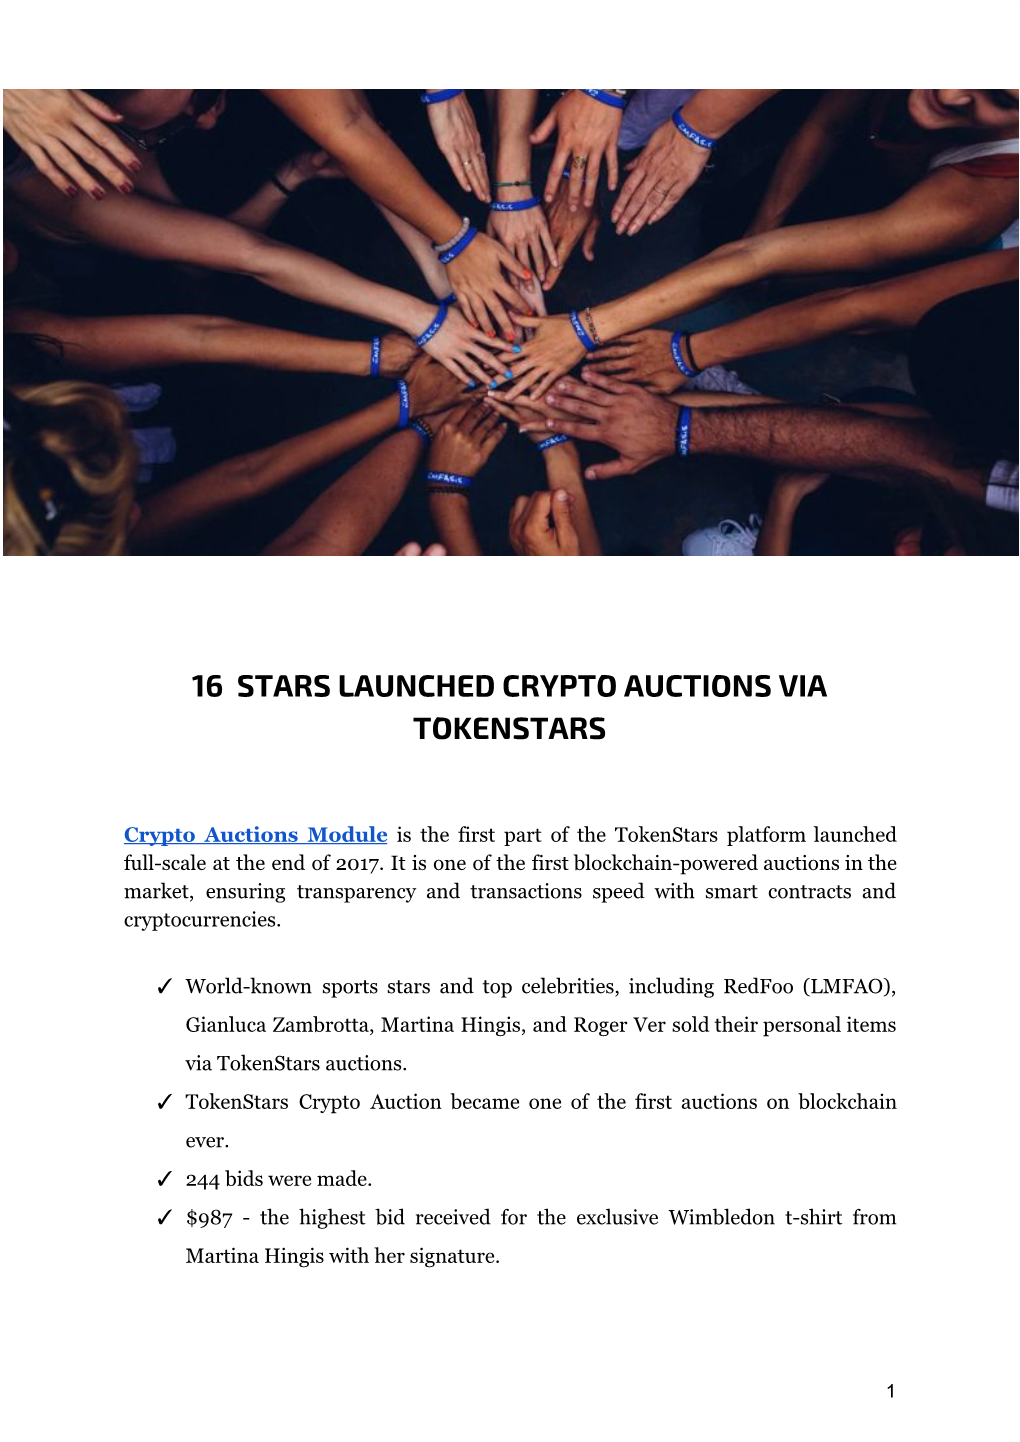 16 Stars Launched Crypto Auctions Via Tokenstars